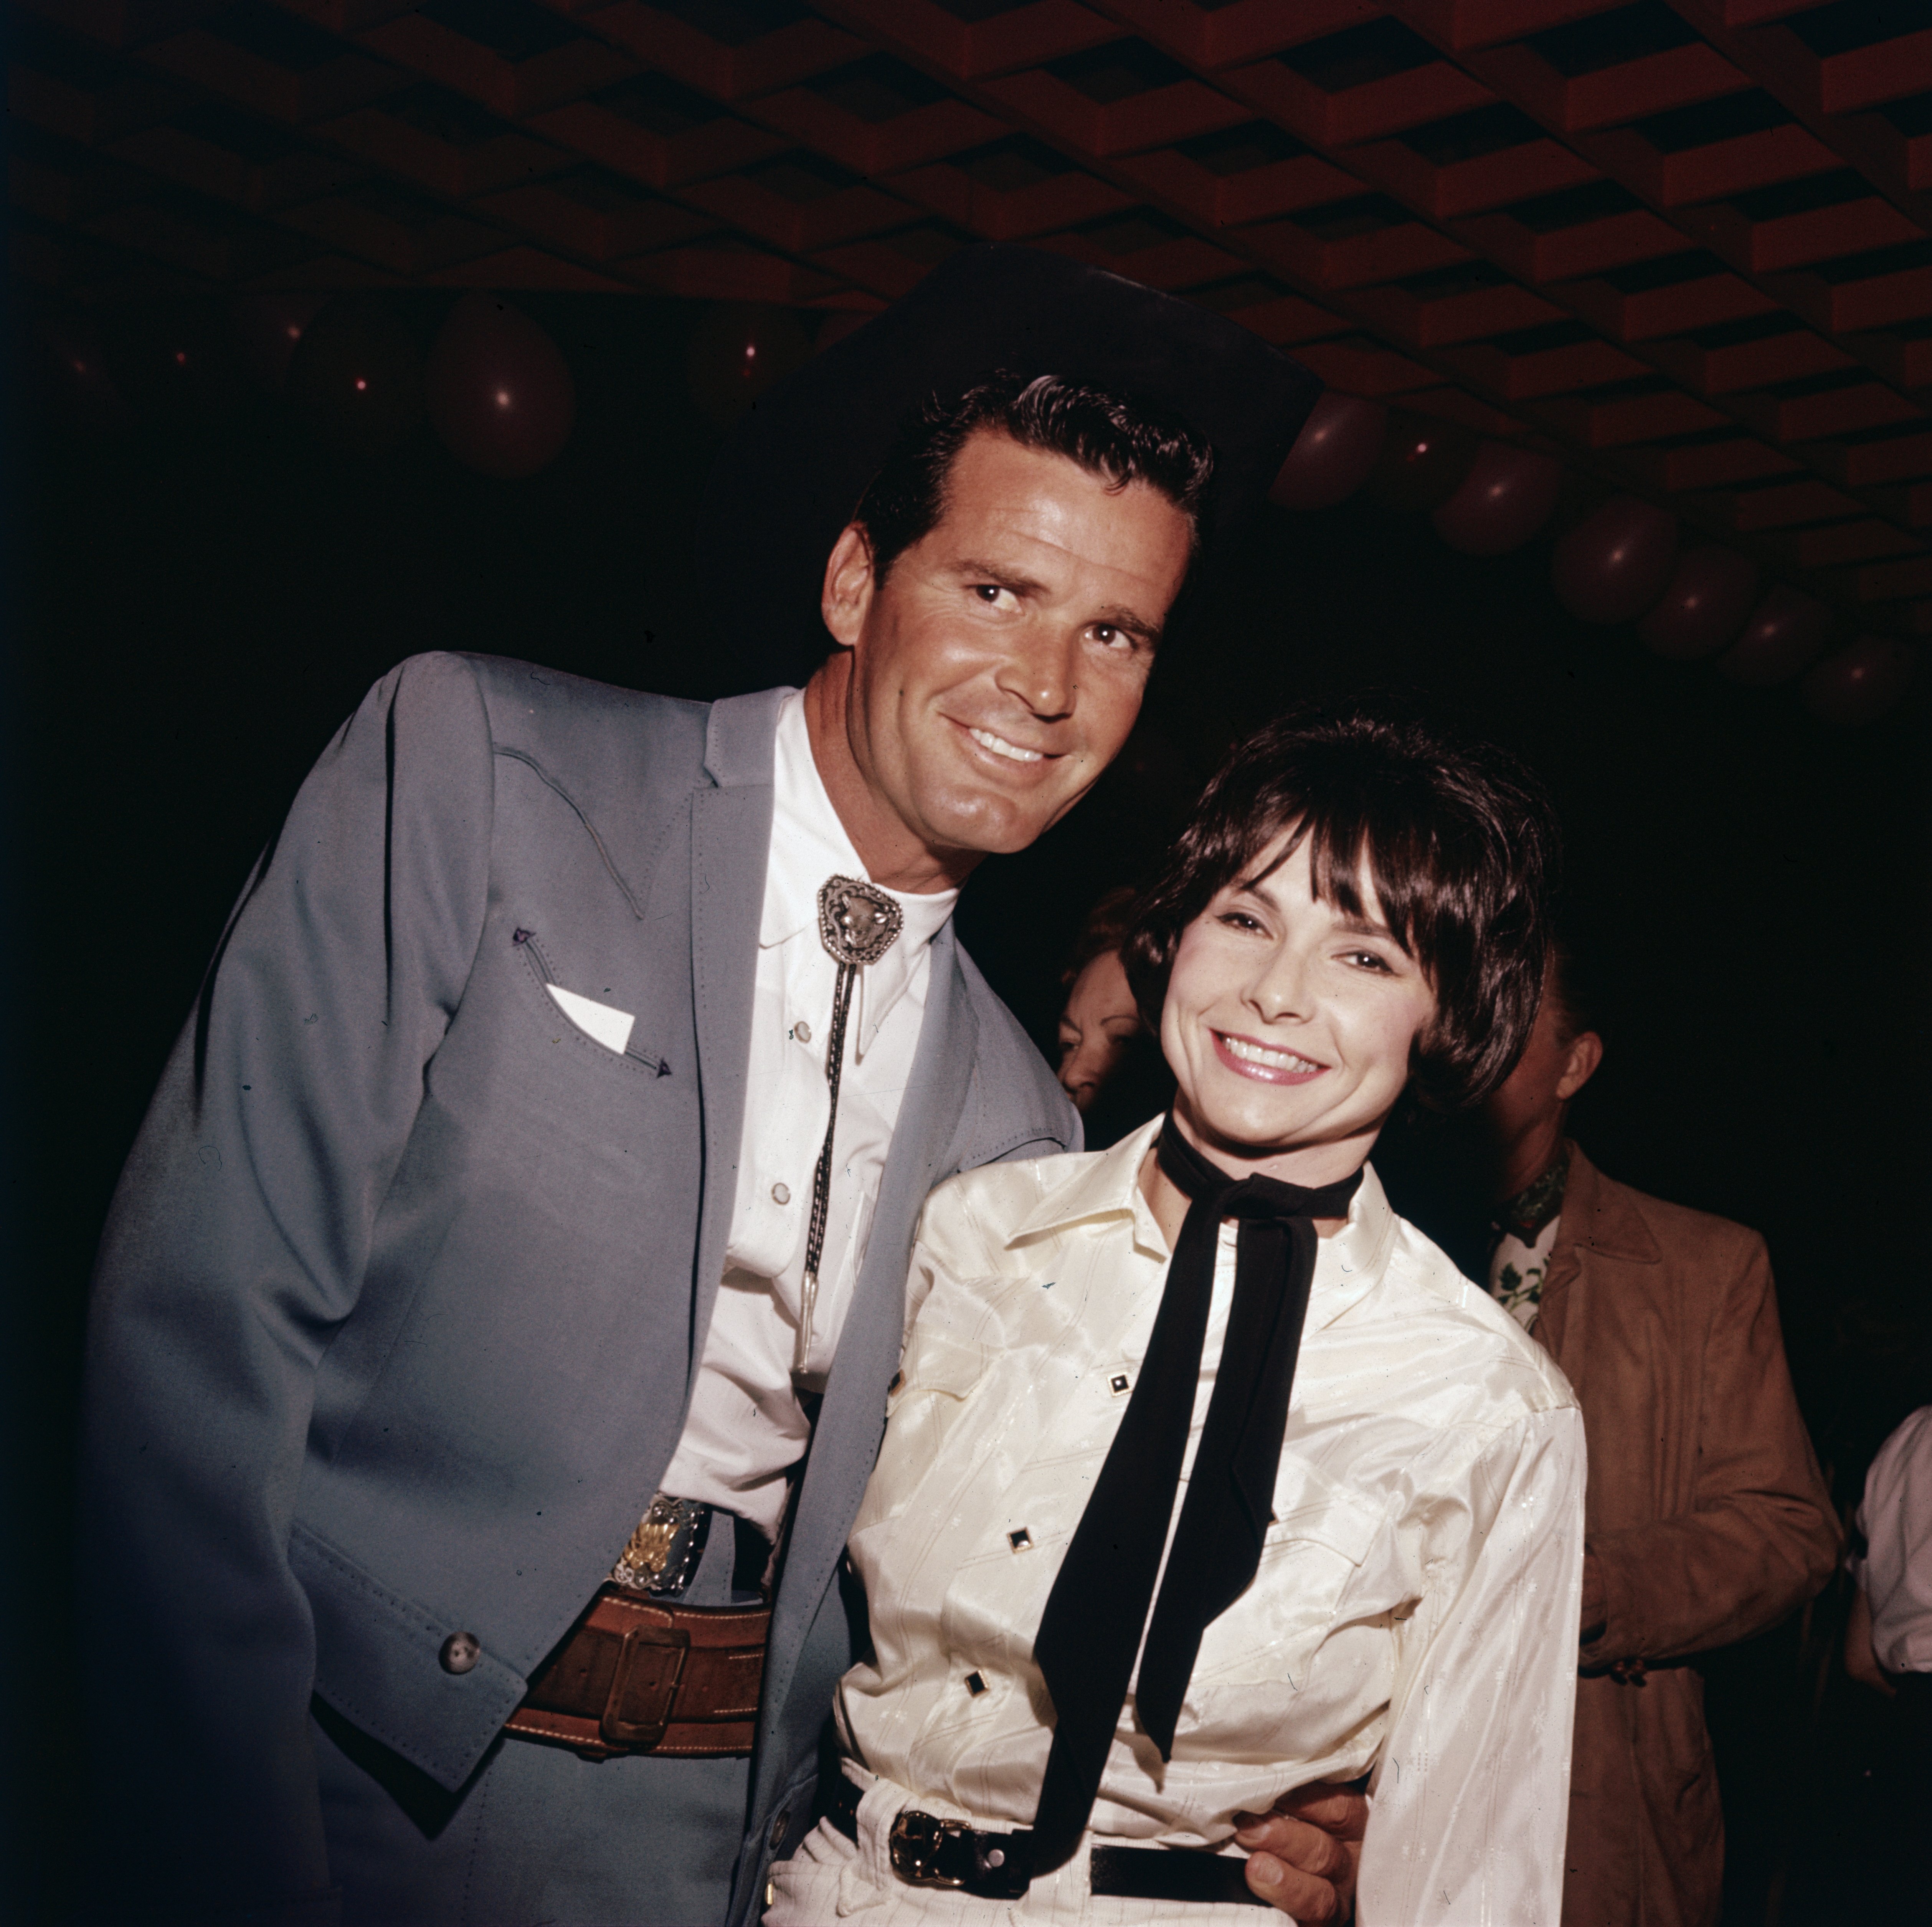 James Garner smiles with his wife, Lois Clarke, as they wear Western gear at a party in the 1960s. | Source: Getty Images